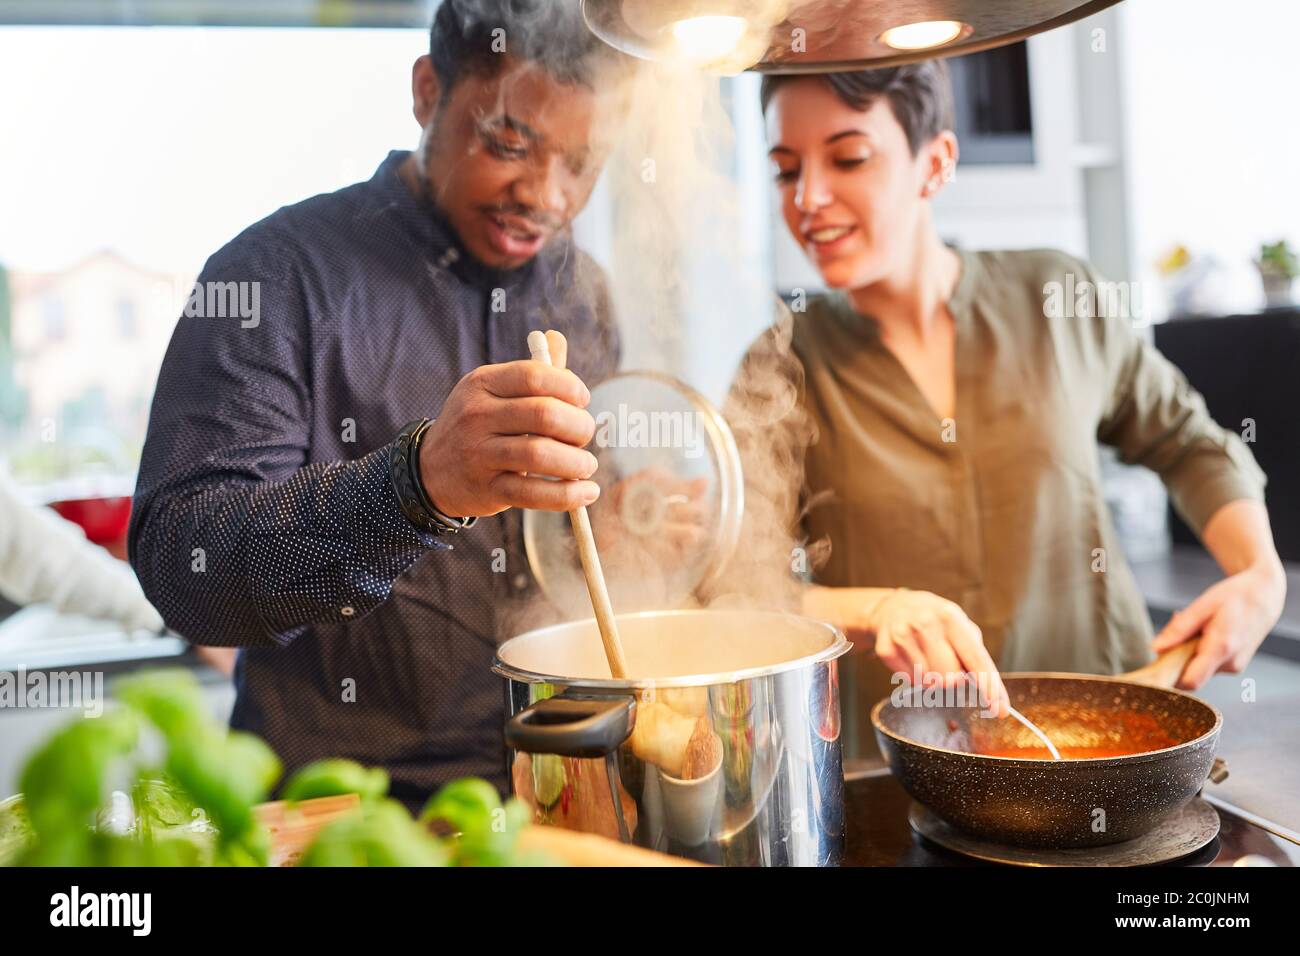 Friends cooking pasta with sauce together in shared kitchen for shared dining Stock Photo